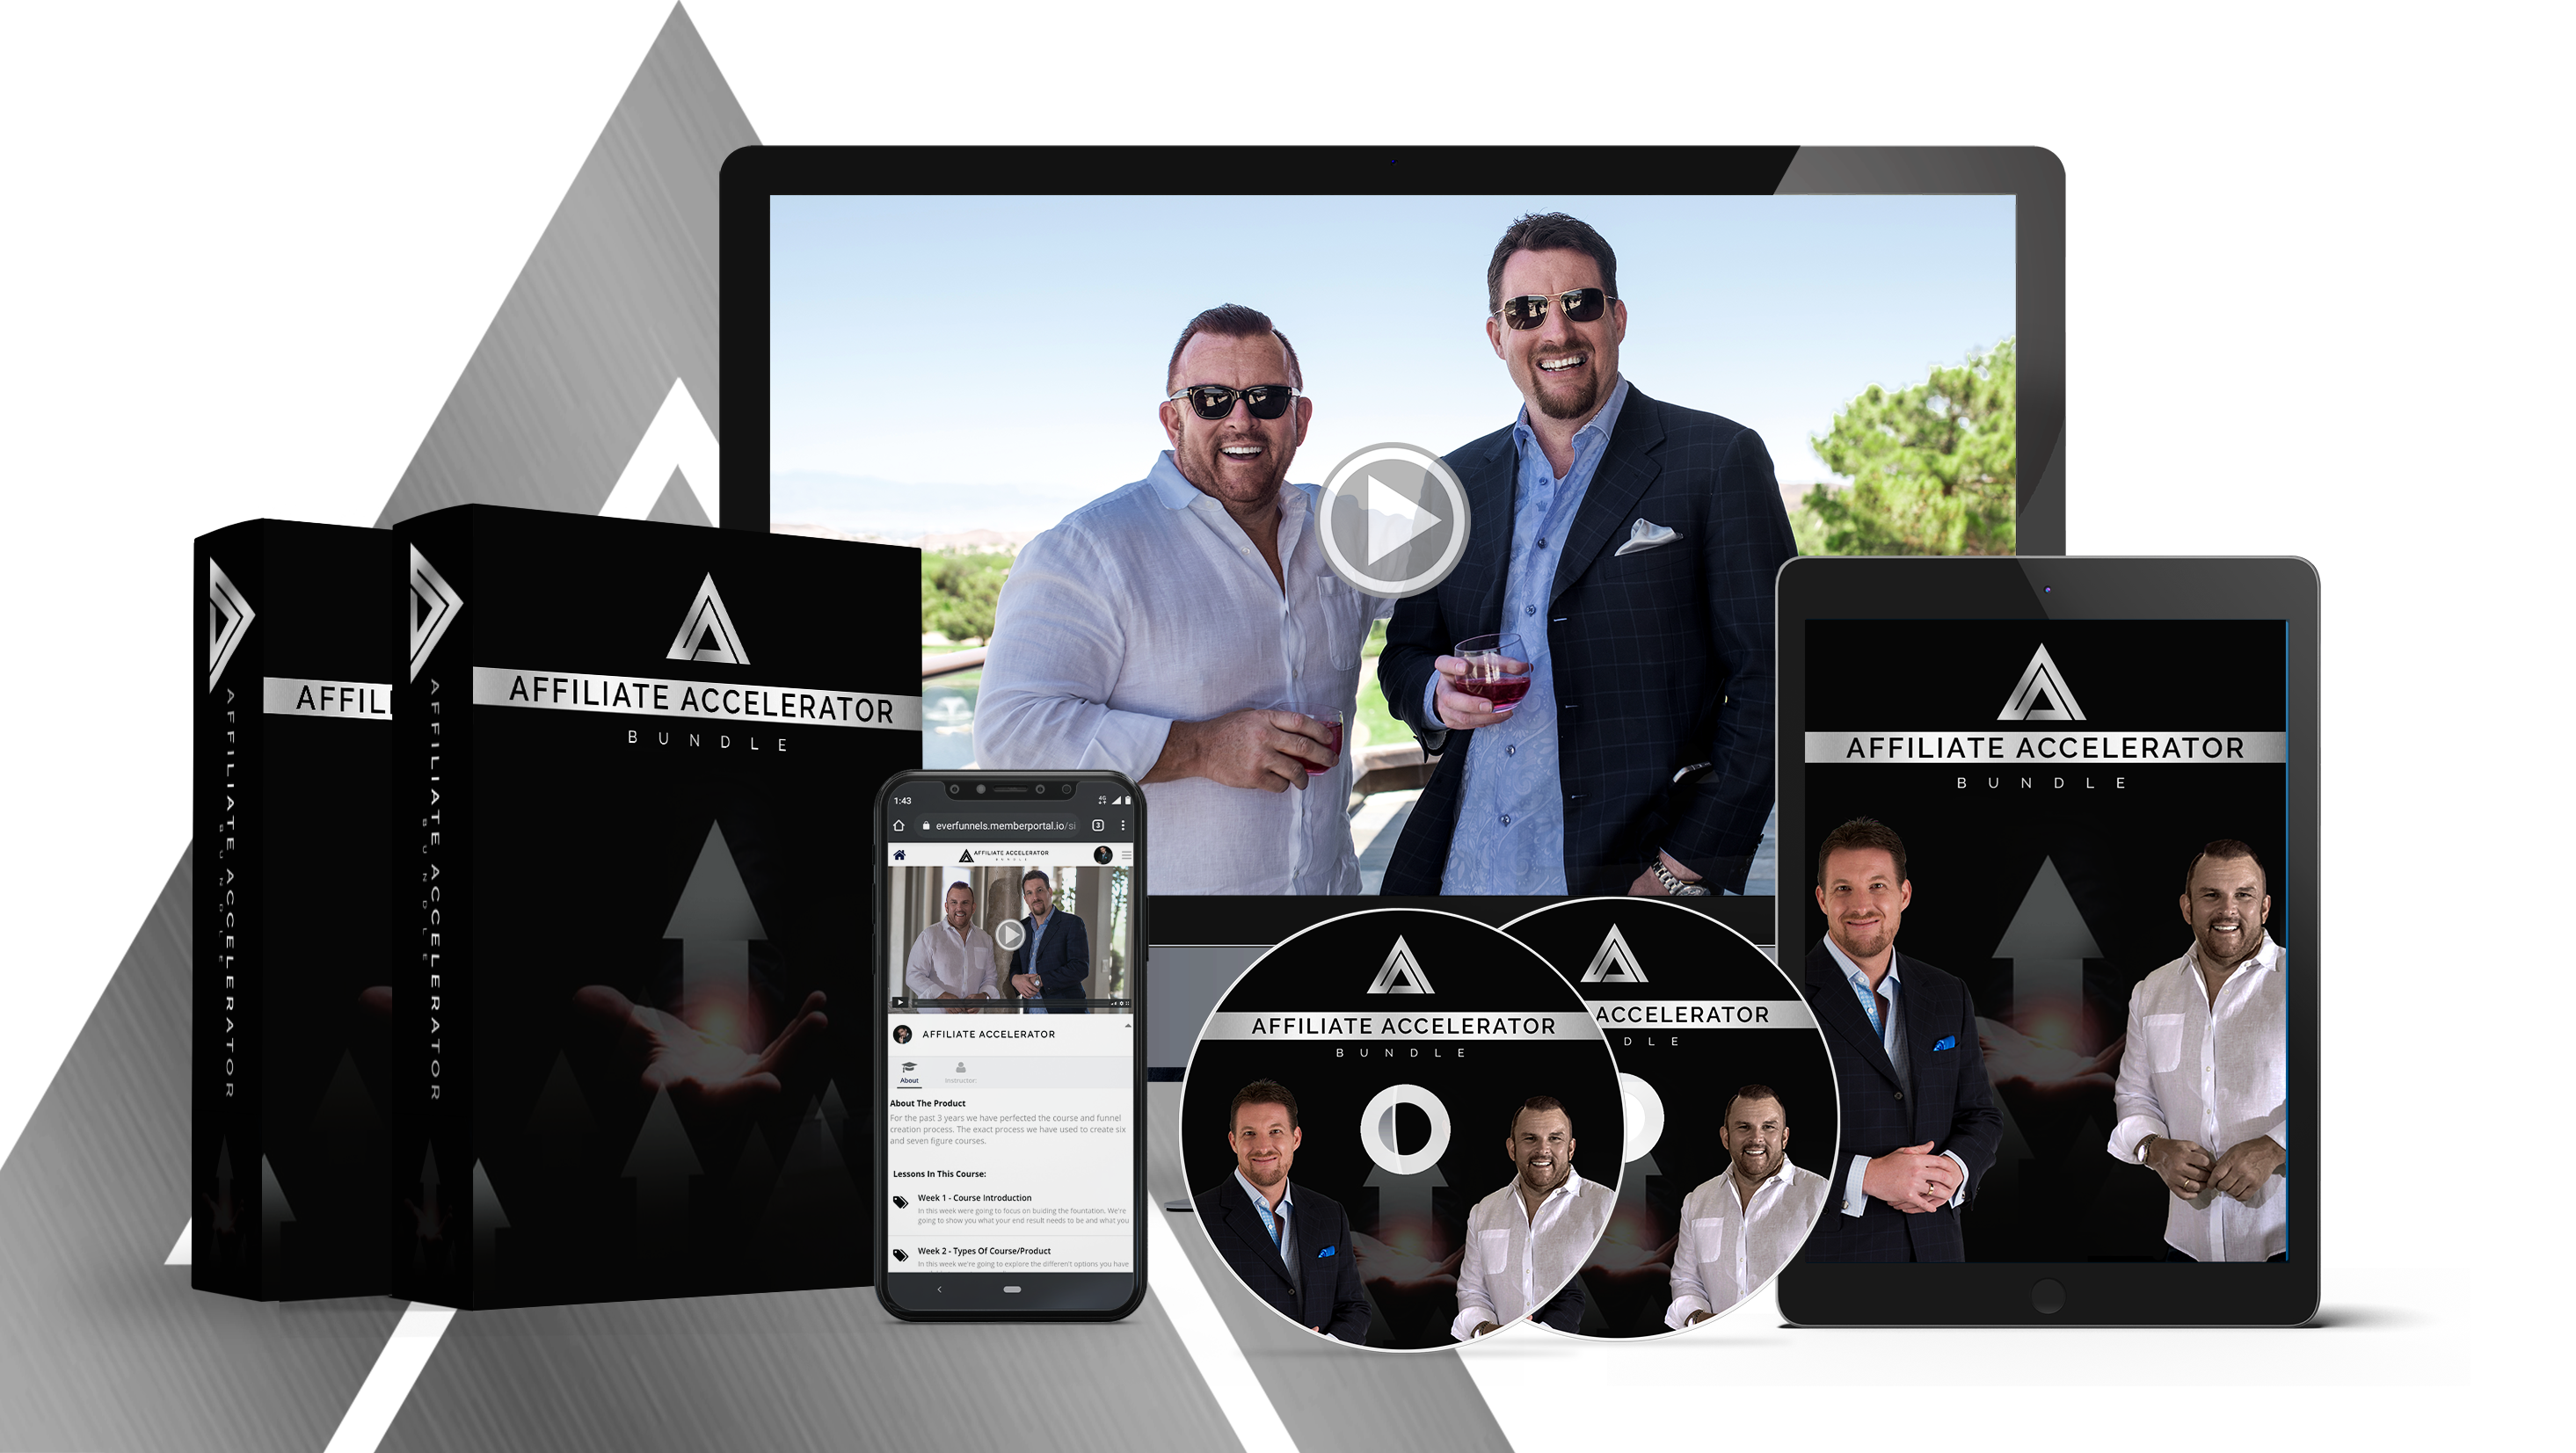 Join the free MintBird Power Affiliate Accelerator Program and start your free training with Perry Belcher and Chad Nicely by clicking on this link: http://smartketinglinks.com/mintbird